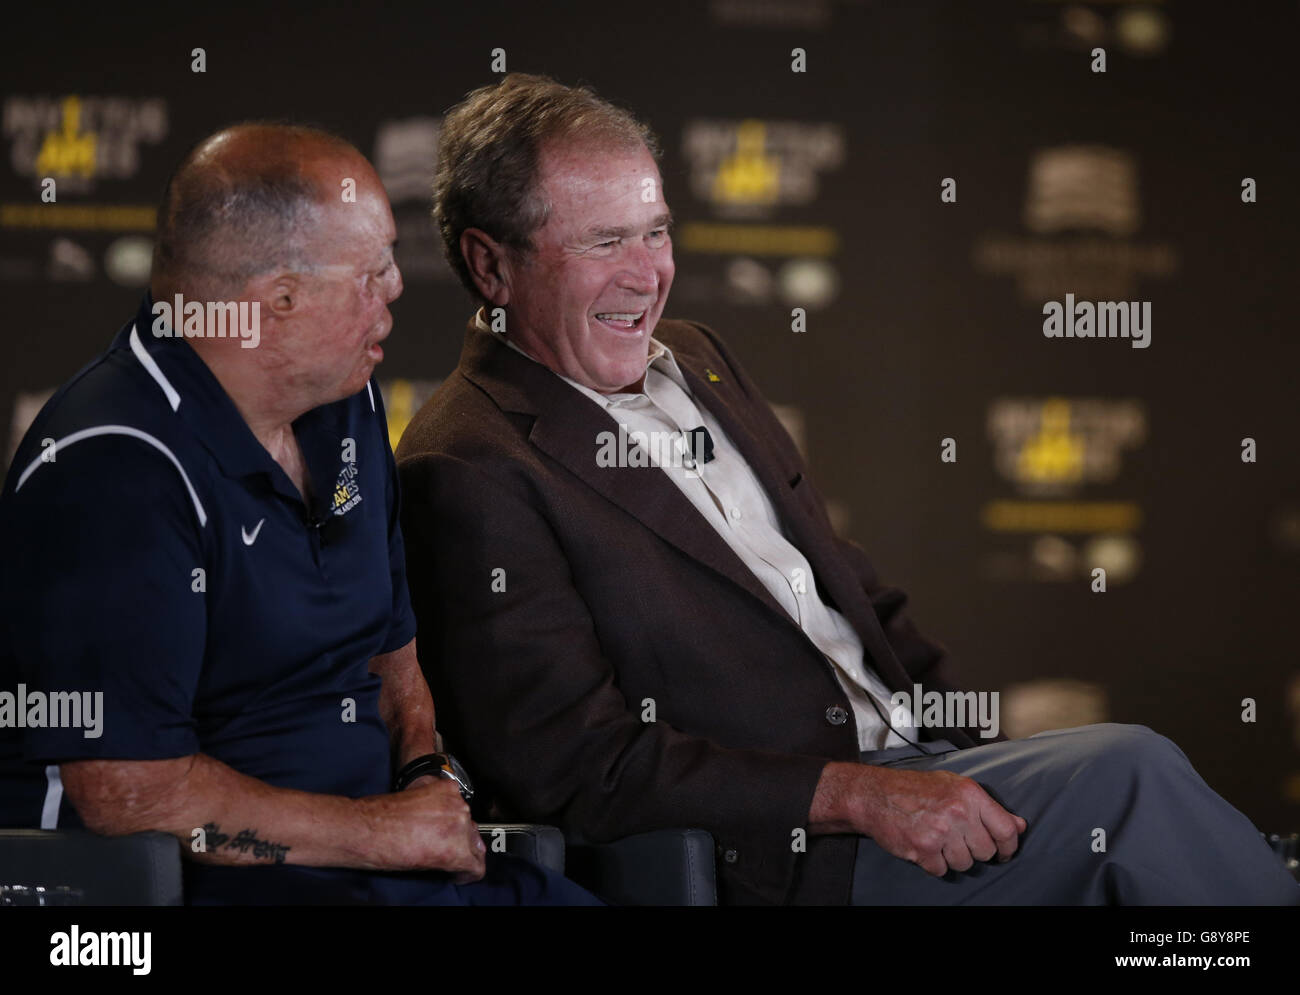 Former US President George W Bush (centre) attends the Symposium on Invisible Wounds presented by the George W. Bush Institute, as part of the Invictus Games, at Shades of Green Hotel in Orlando, Florida. Stock Photo